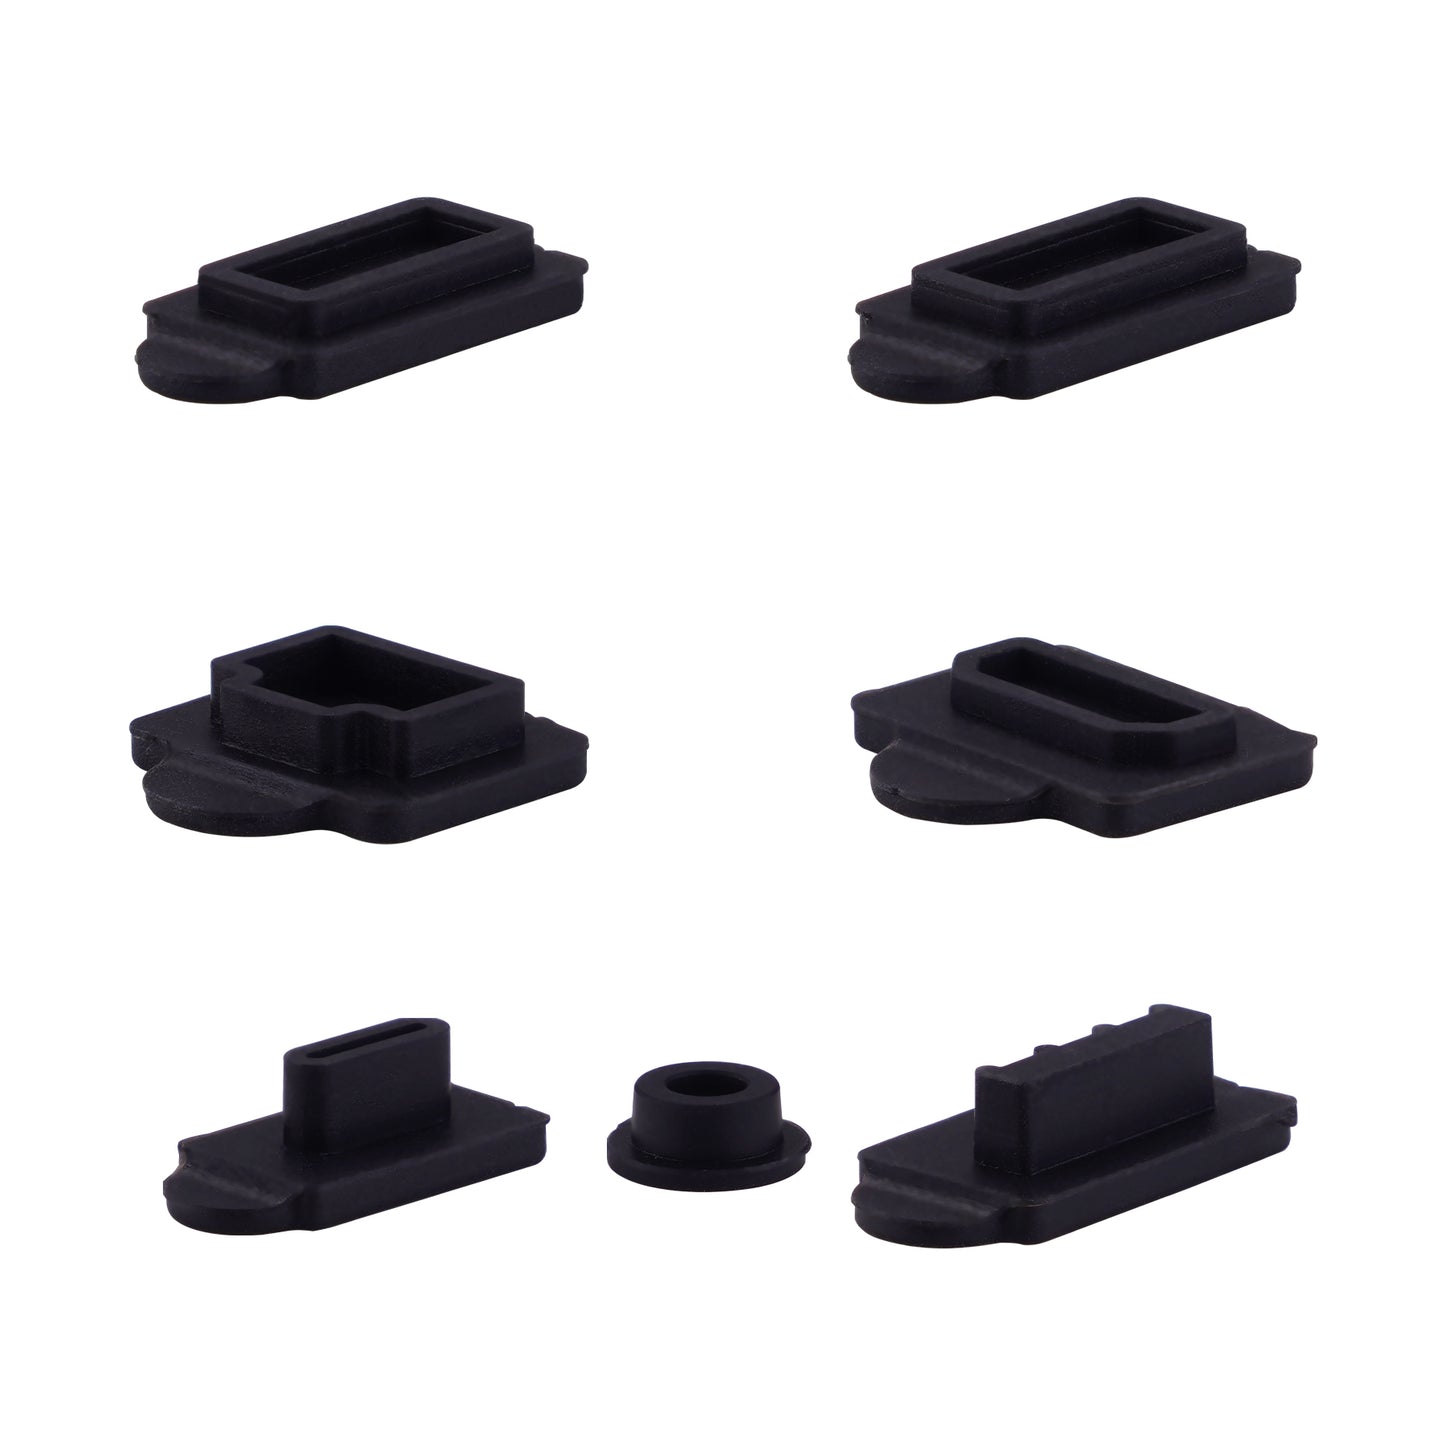 PlayVital Silicone Dust Plug Set for ps5 Console, USB HDMI Interface Type A/C LAN Port Dust Cover Stopper for ps5 Digital & Disc Edition Console, Dustproof Plug Accessories for ps5 Console - Black - CSPFM002 PlayVital